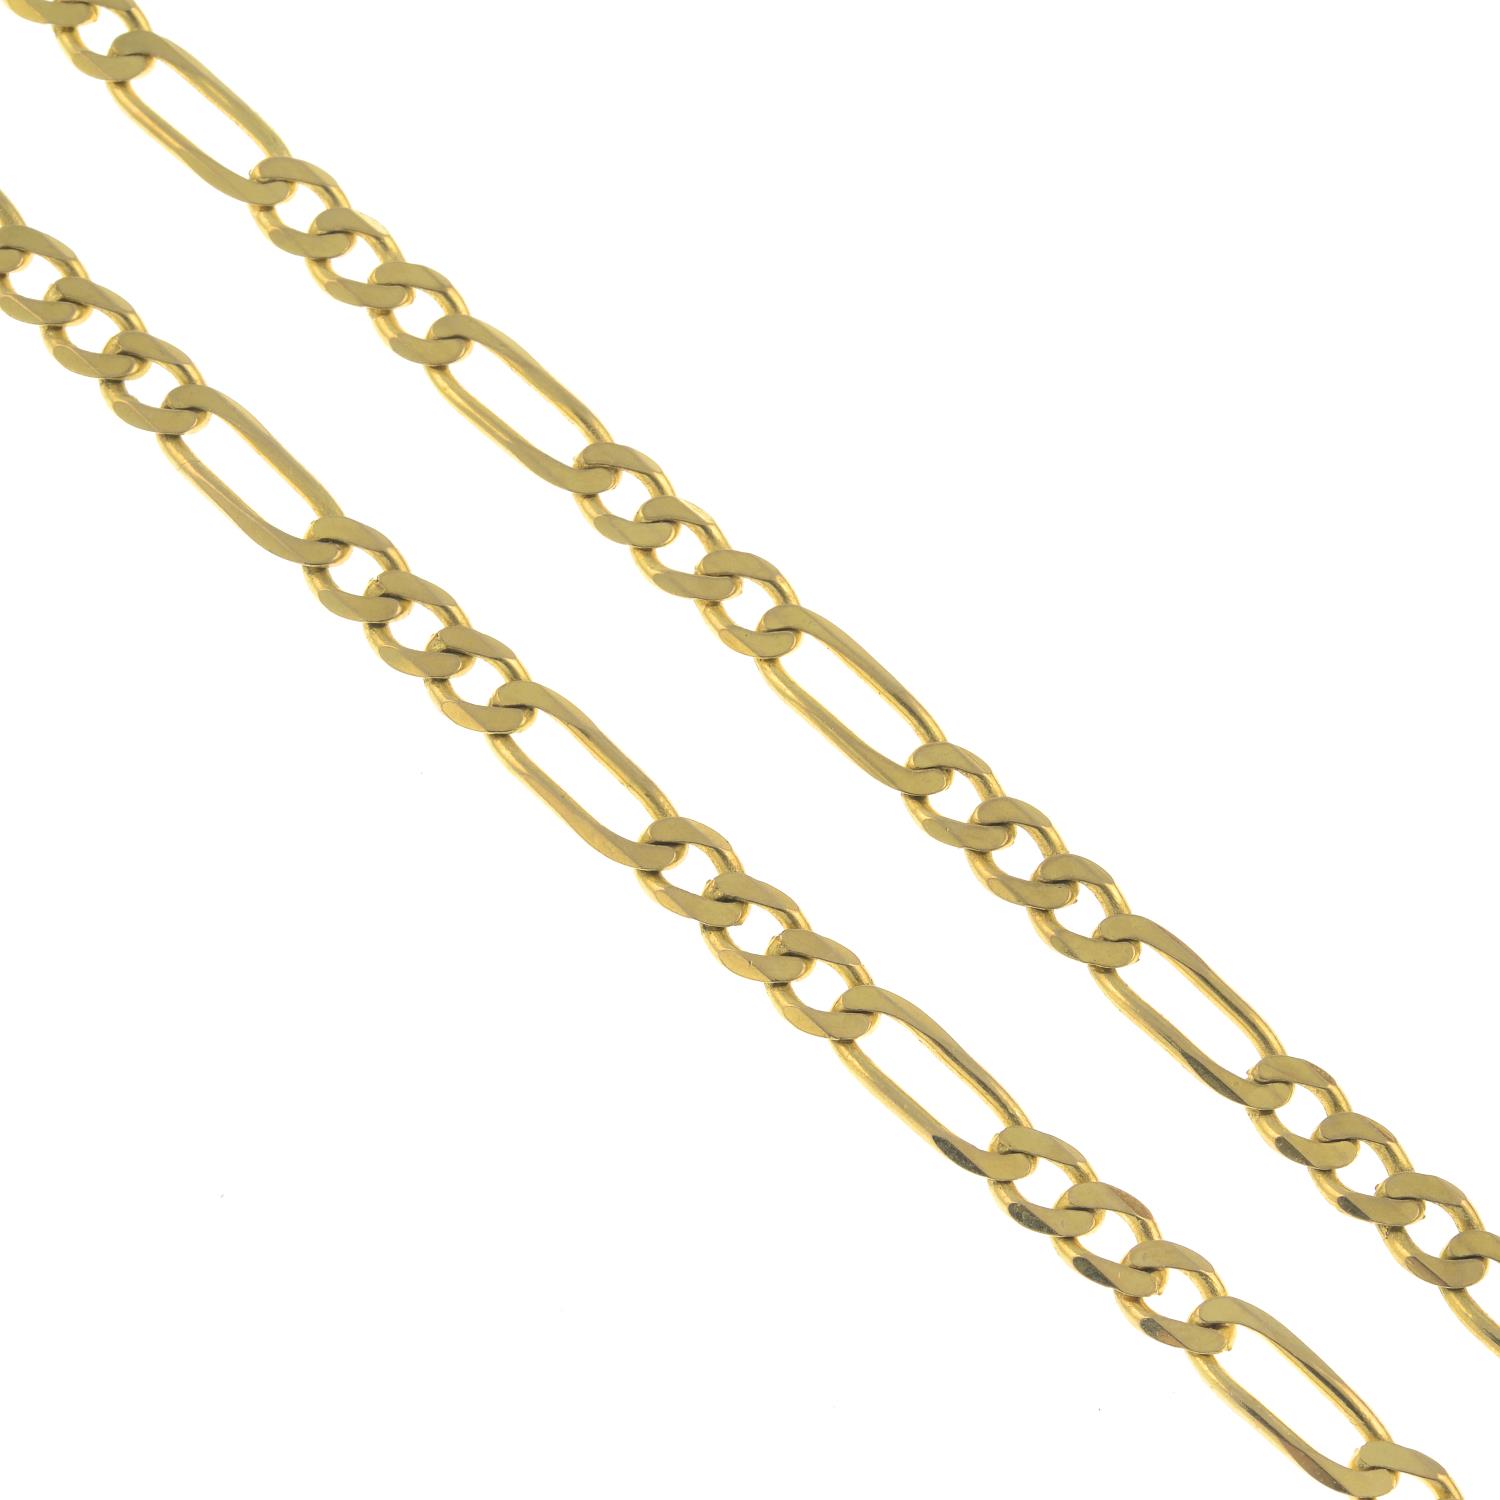 A 9ct gold Figaro-link chain.Hallmarks for 9ct gold.